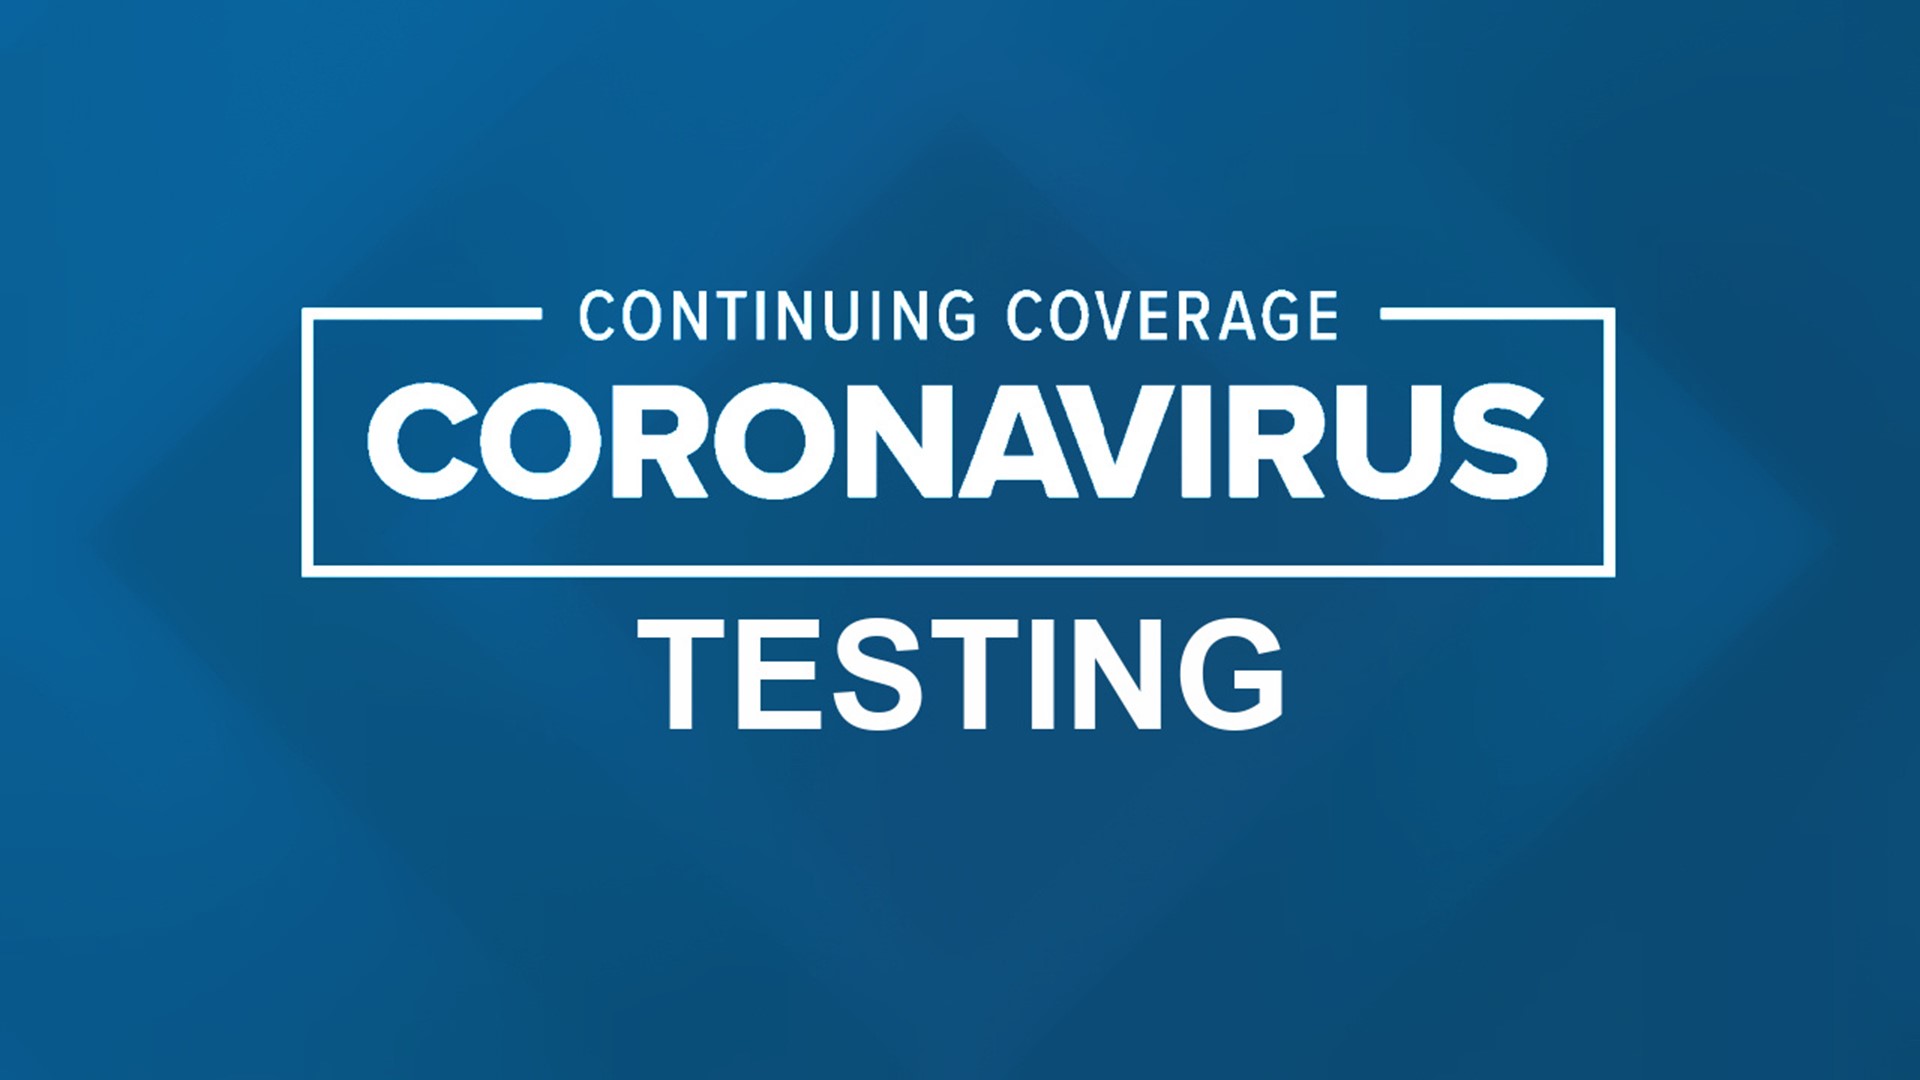 The state is setting up five COVID-19 testing sites beginning this weekend, including one in our area.